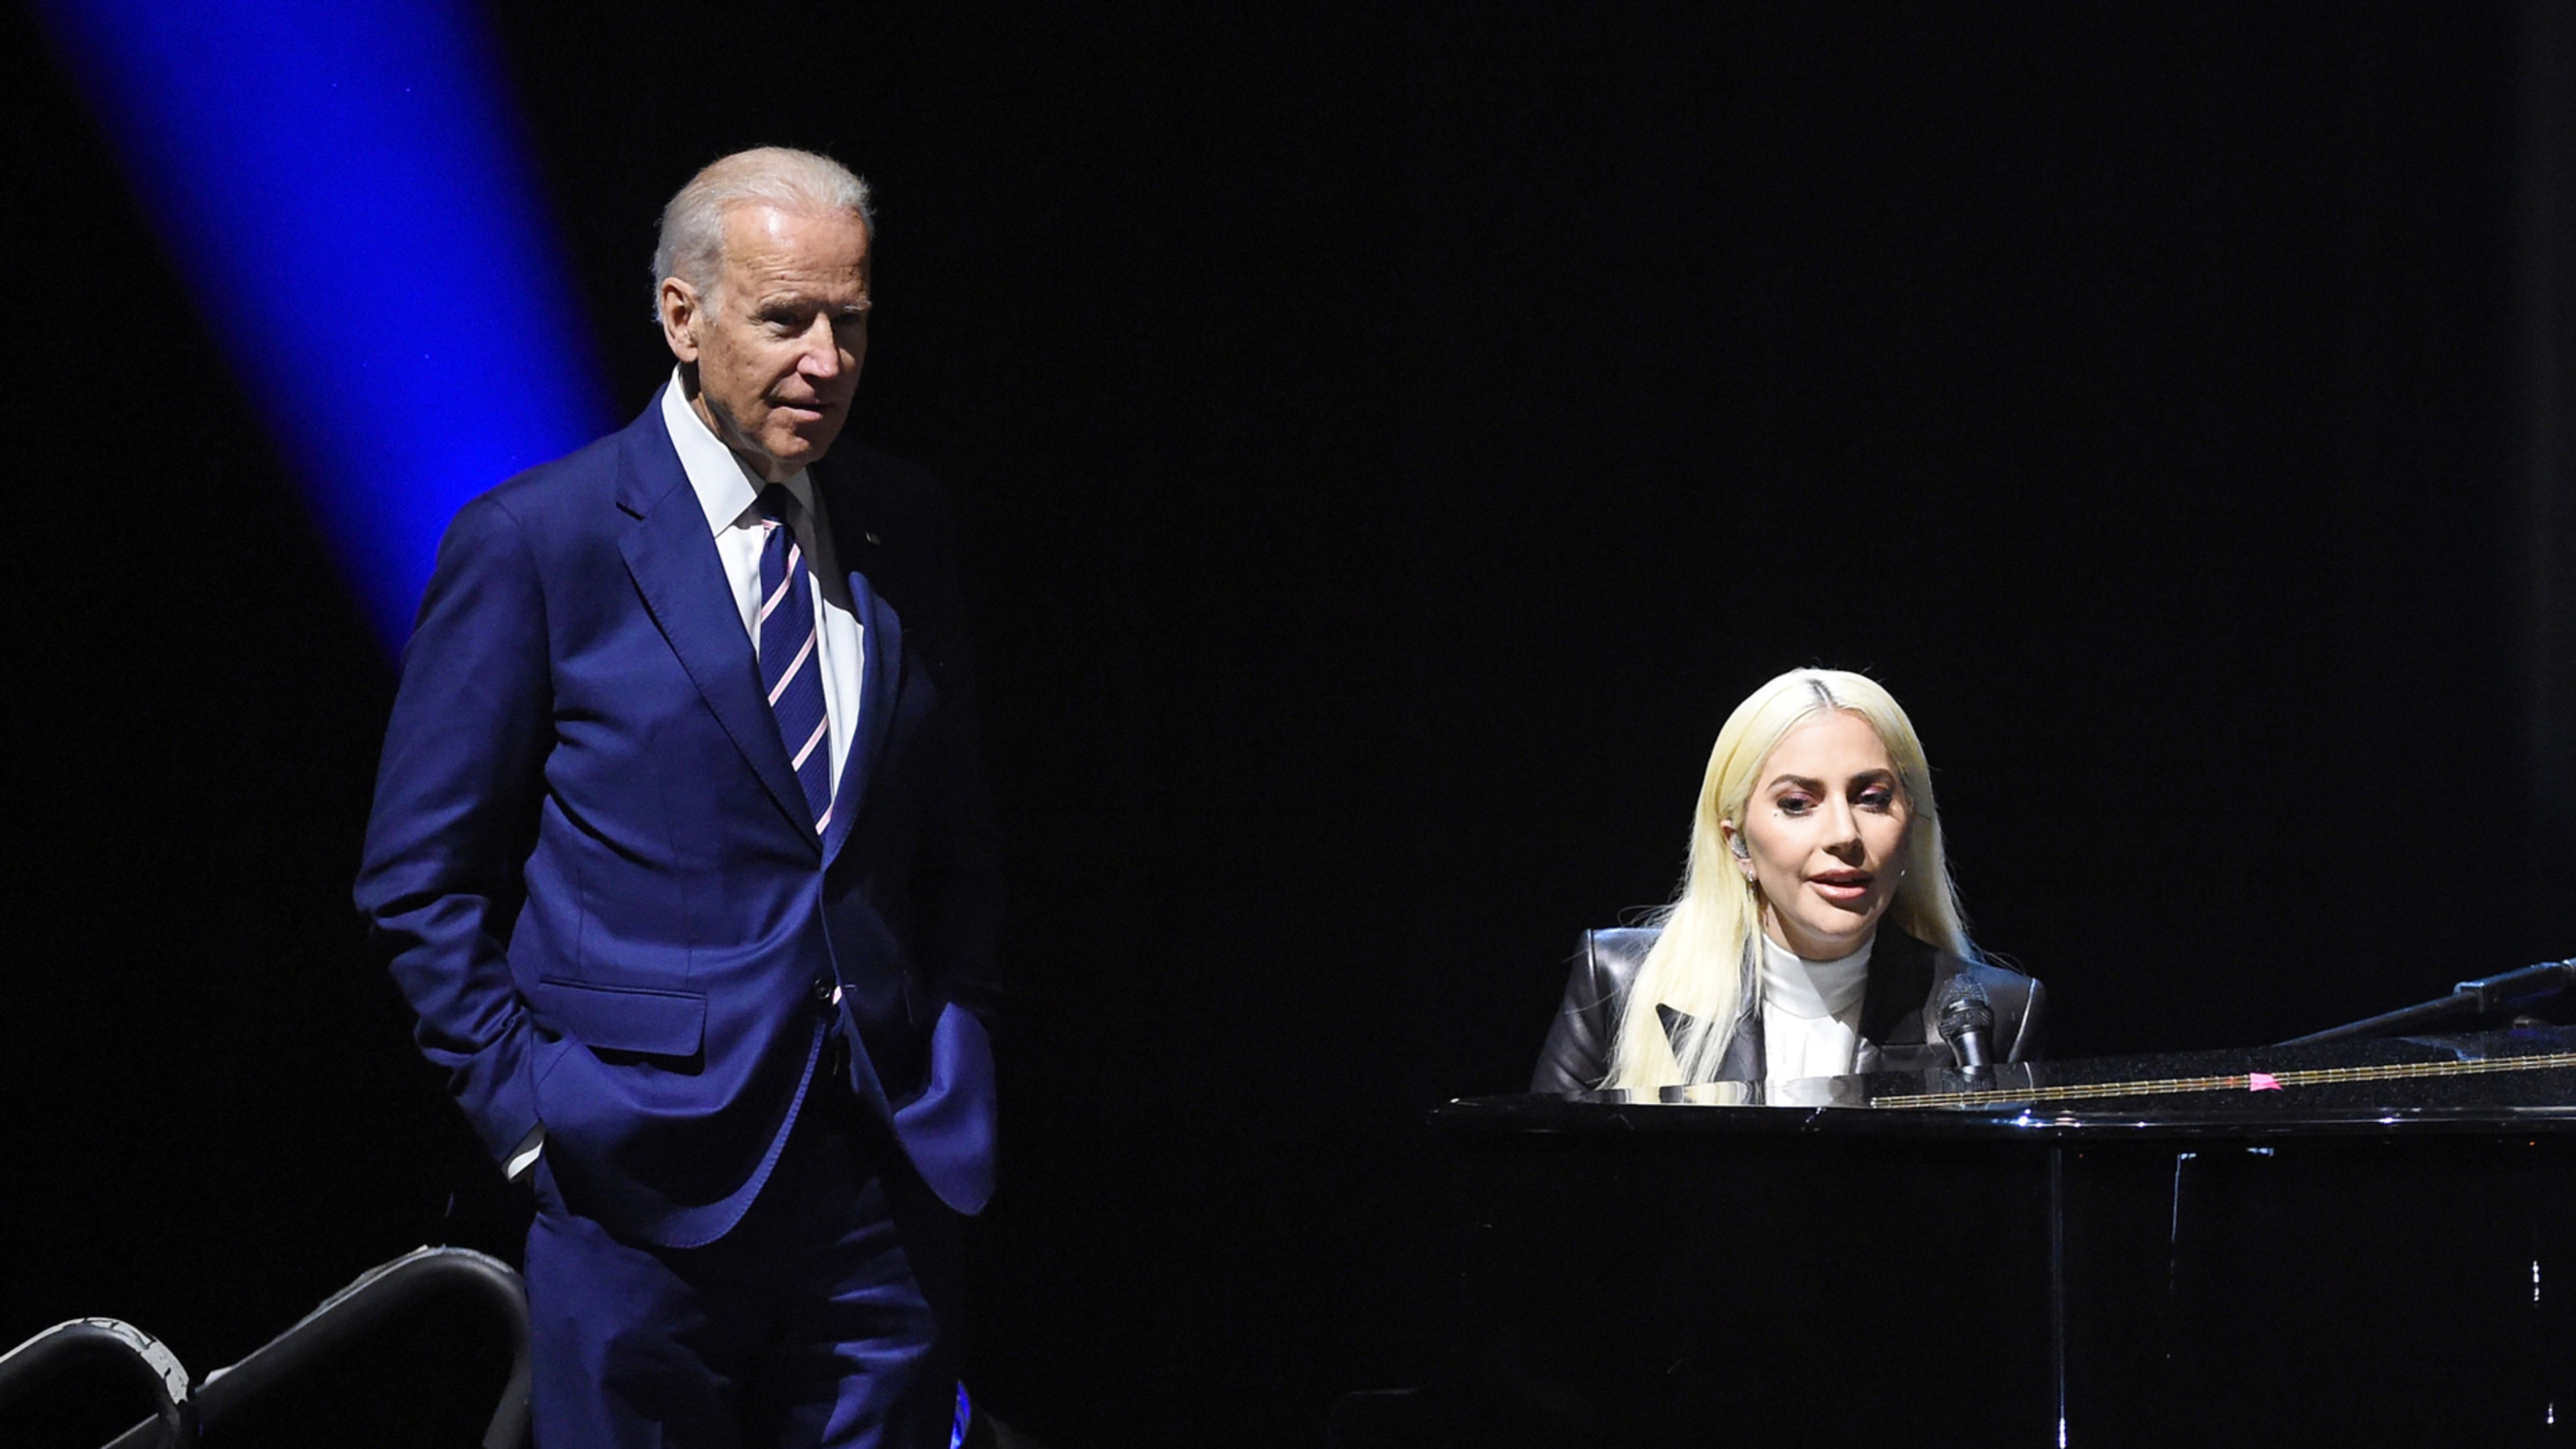 Joe Biden and Lady Gaga team up to fight sexual assault